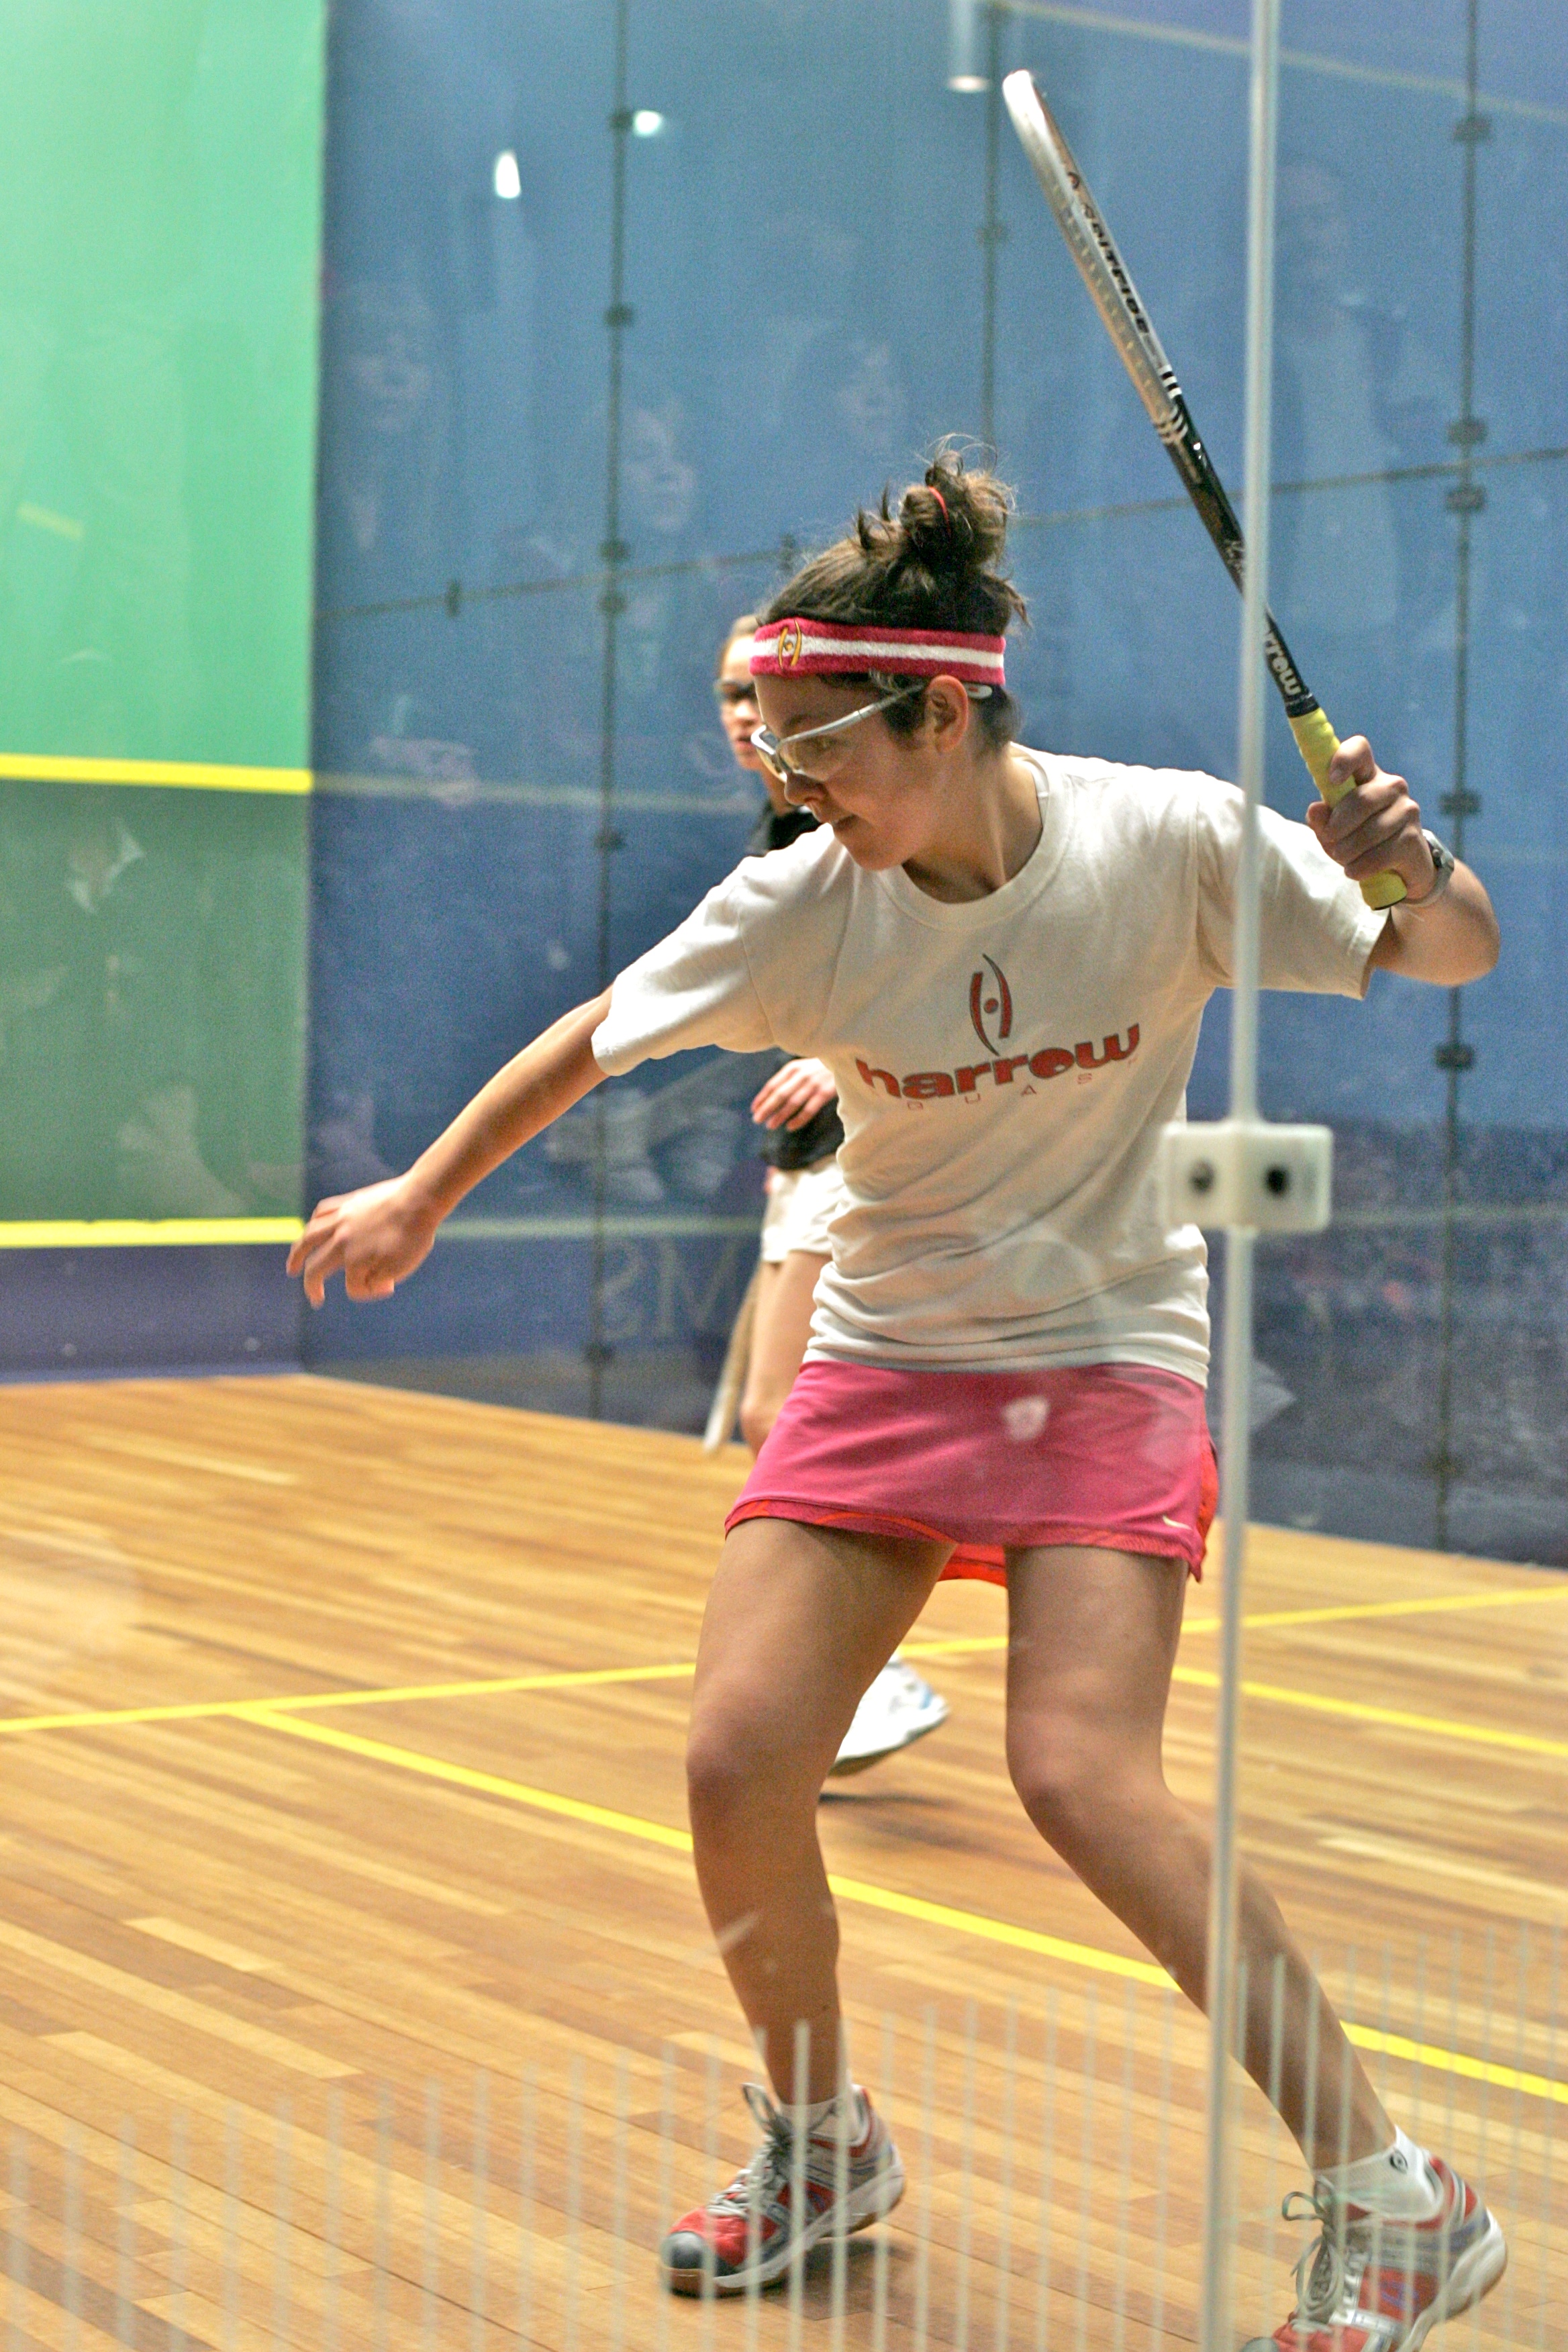 Amanda Sobhy, finished the season ranked No. 1 in both the U15 and U17 divisions. Sobhy also won a Junior Gold title in the U17 to go along with the U15 title she won in the U.S. Junior Open in December.